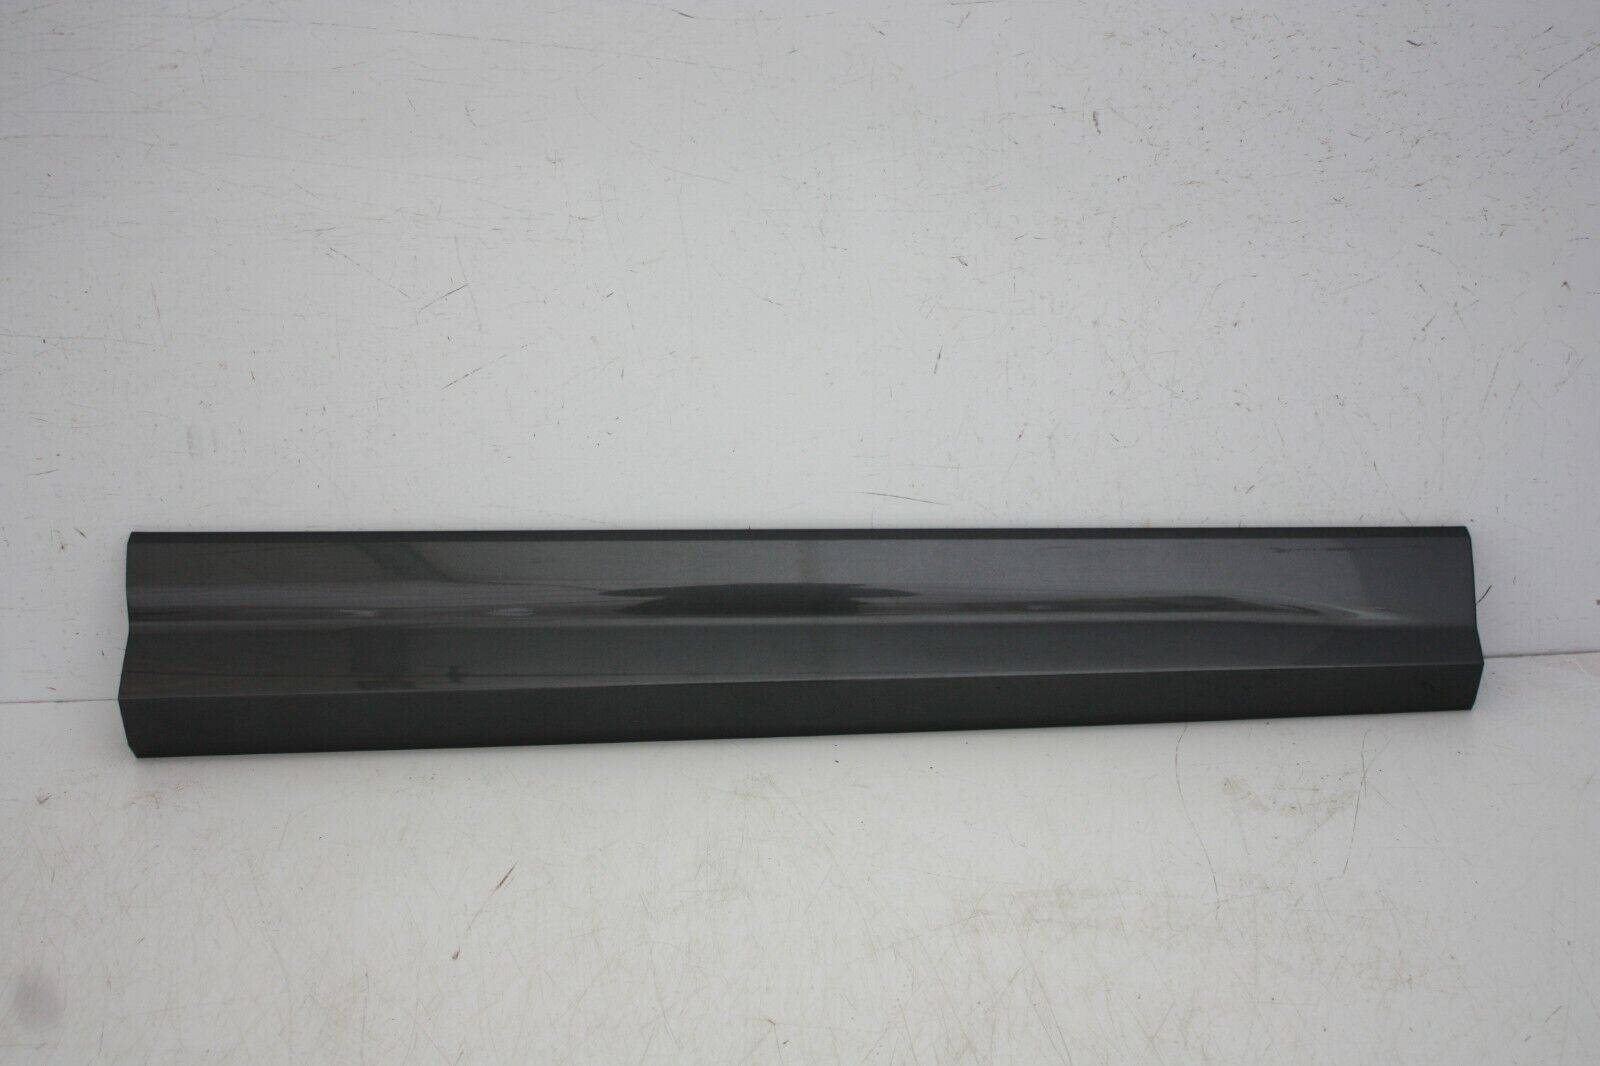 Audi Q2 S Line Front Right Side Door Moulding 2016 TO 2021 Genuine 175367544173